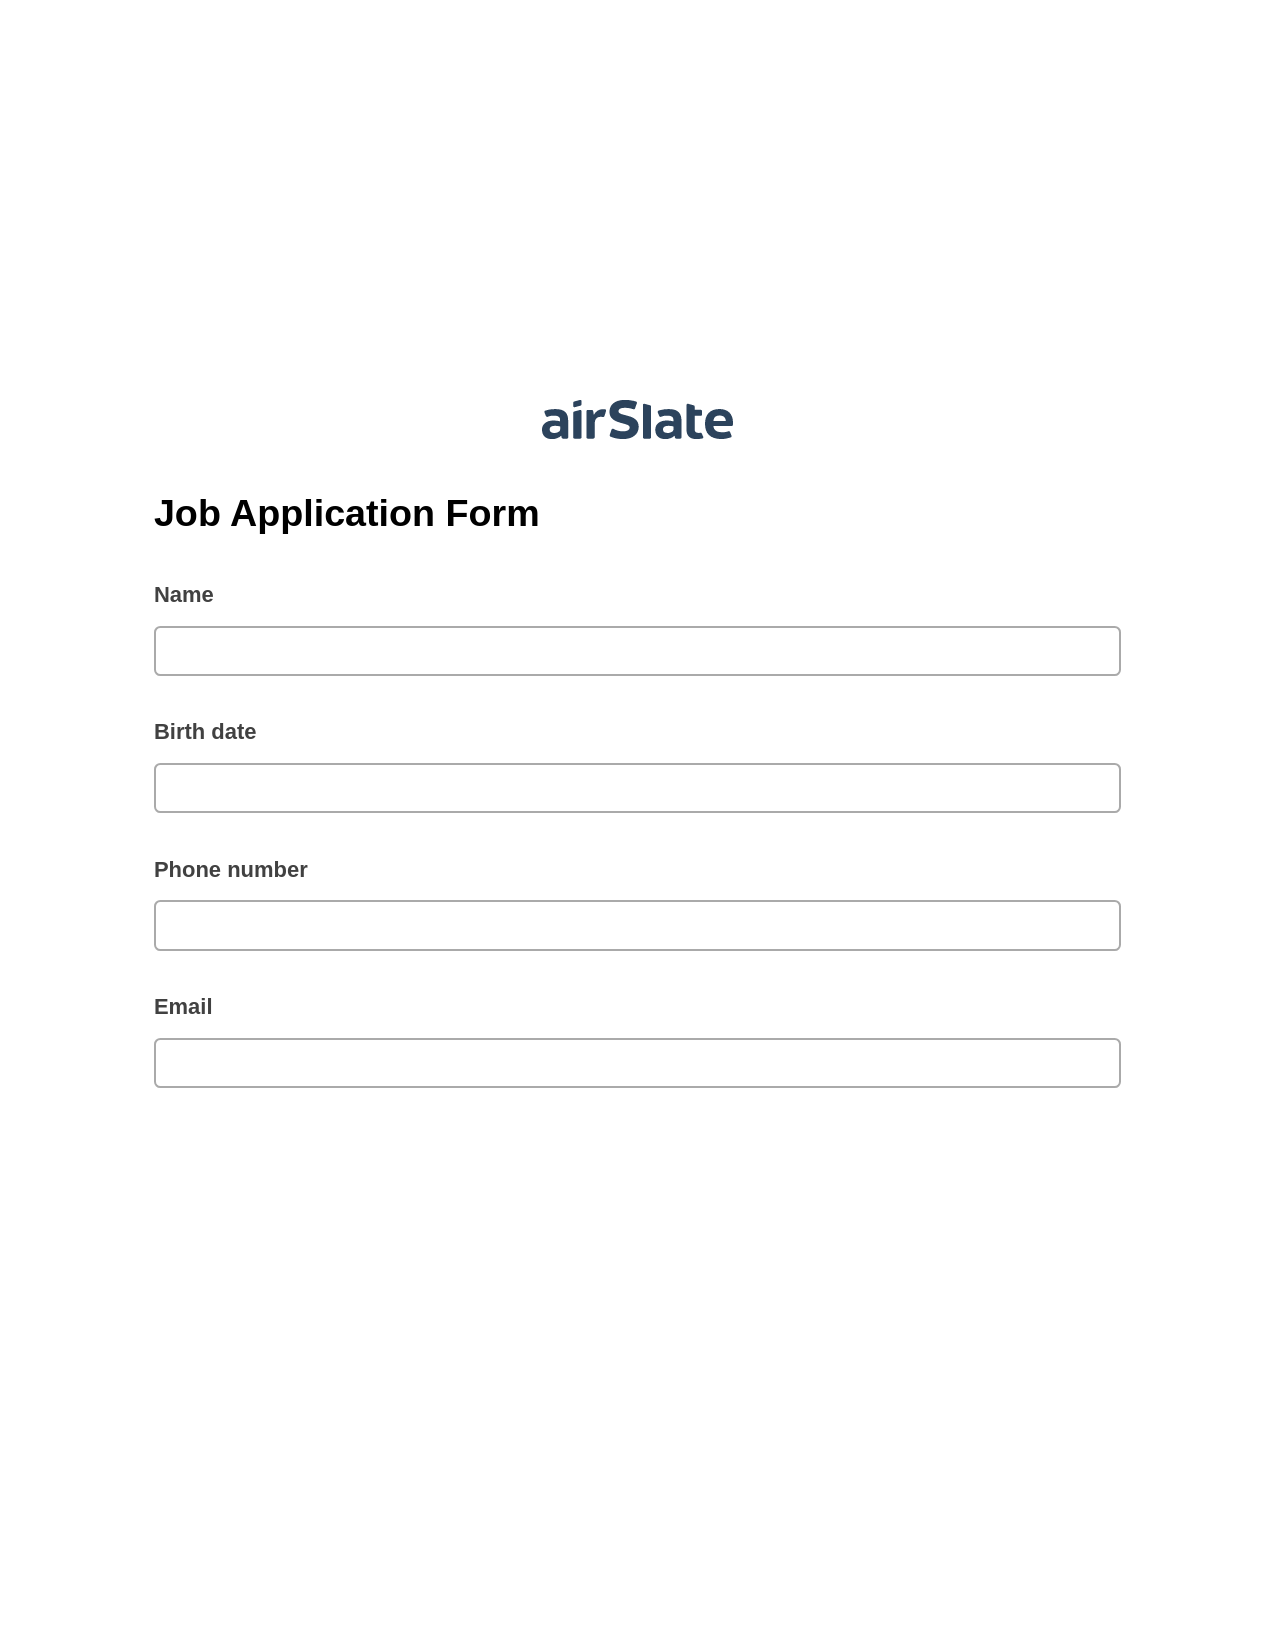 Job Application Form Pre-fill Slate from MS Dynamics 365 Records Bot, Update NetSuite Records Bot, Export to Google Sheet Bot